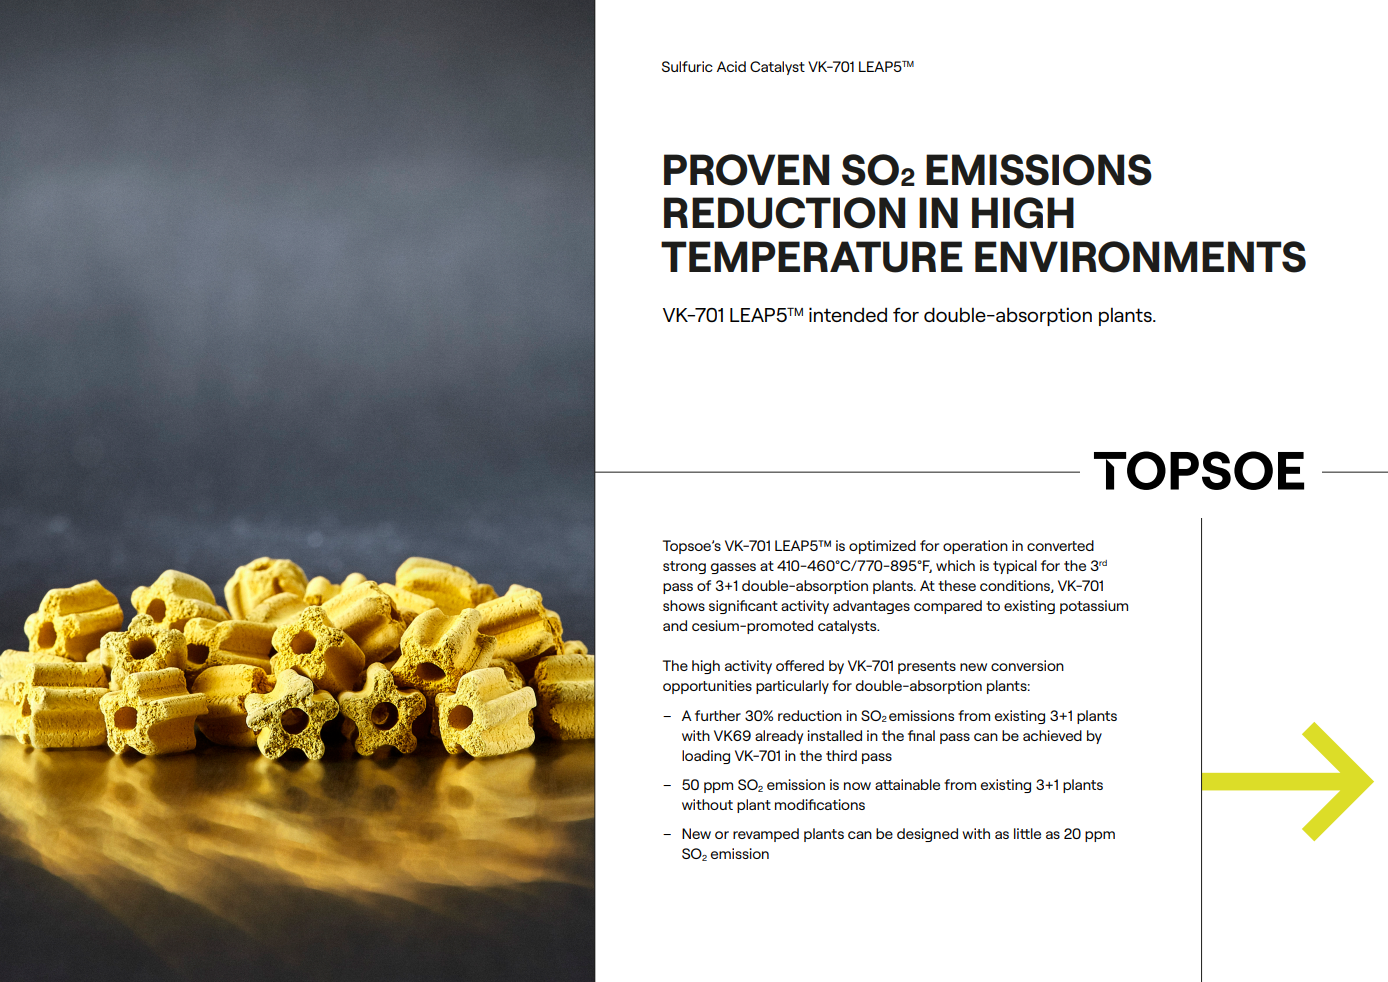 Proven SO2 emissions reduction in high temperature environments